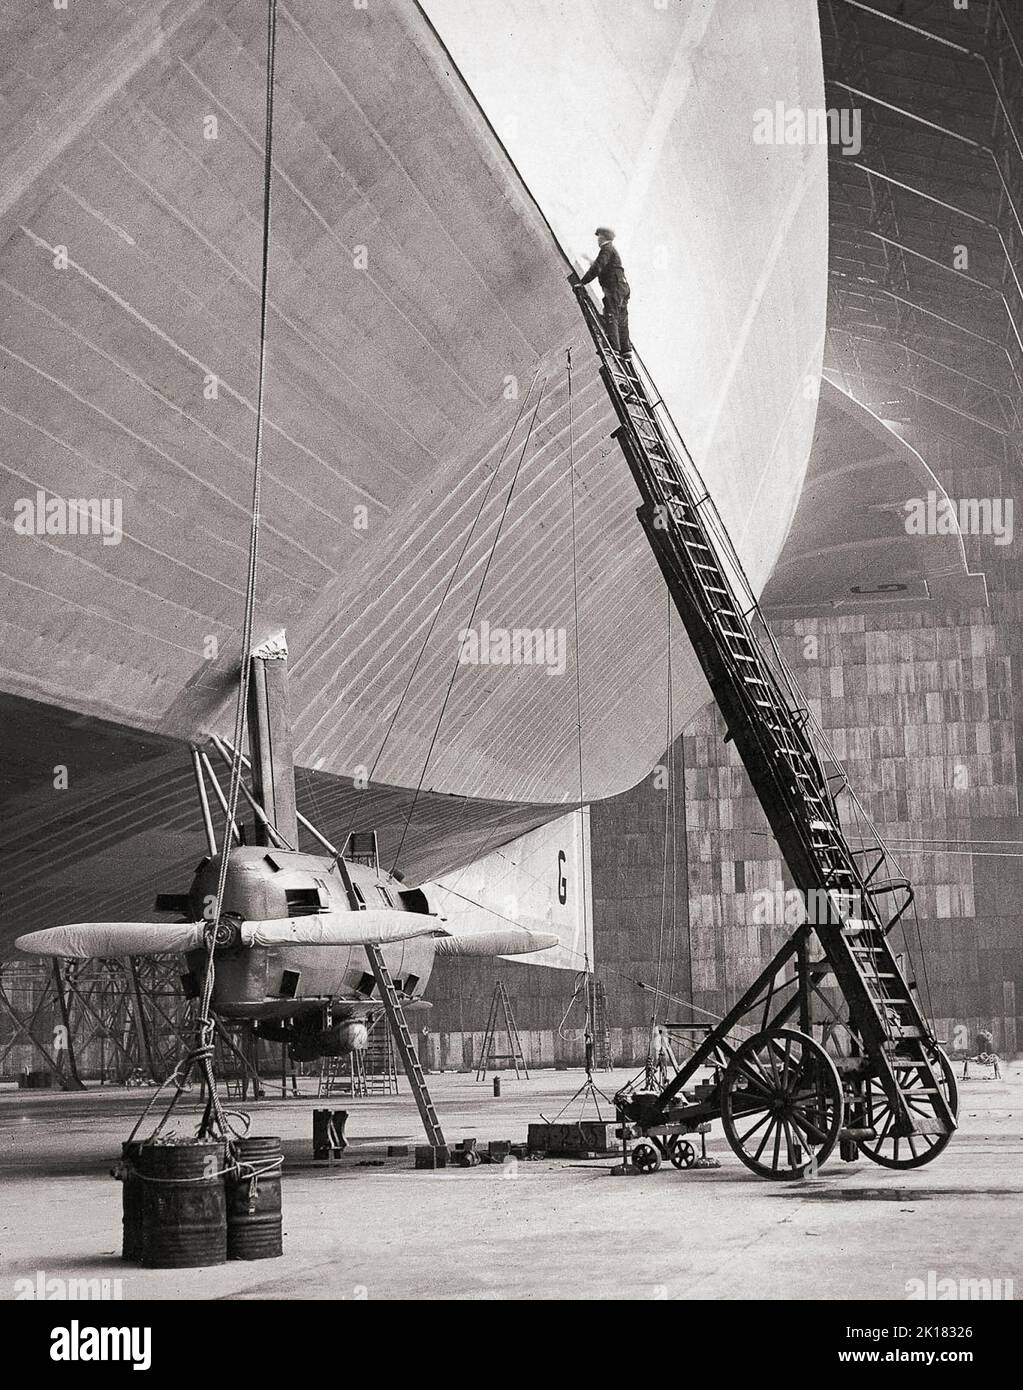 Airship R100 nearing completion in its hanger in Yorkshire, England in 1929. It was a privately designed and built British rigid airship made as part of a two-ship competition to develop a commercial airship service for use on British Empire routes as part of the Imperial Airship Scheme. The other airship, the R101, was built by the British Air Ministry, but both airships were funded by the Government. Stock Photo